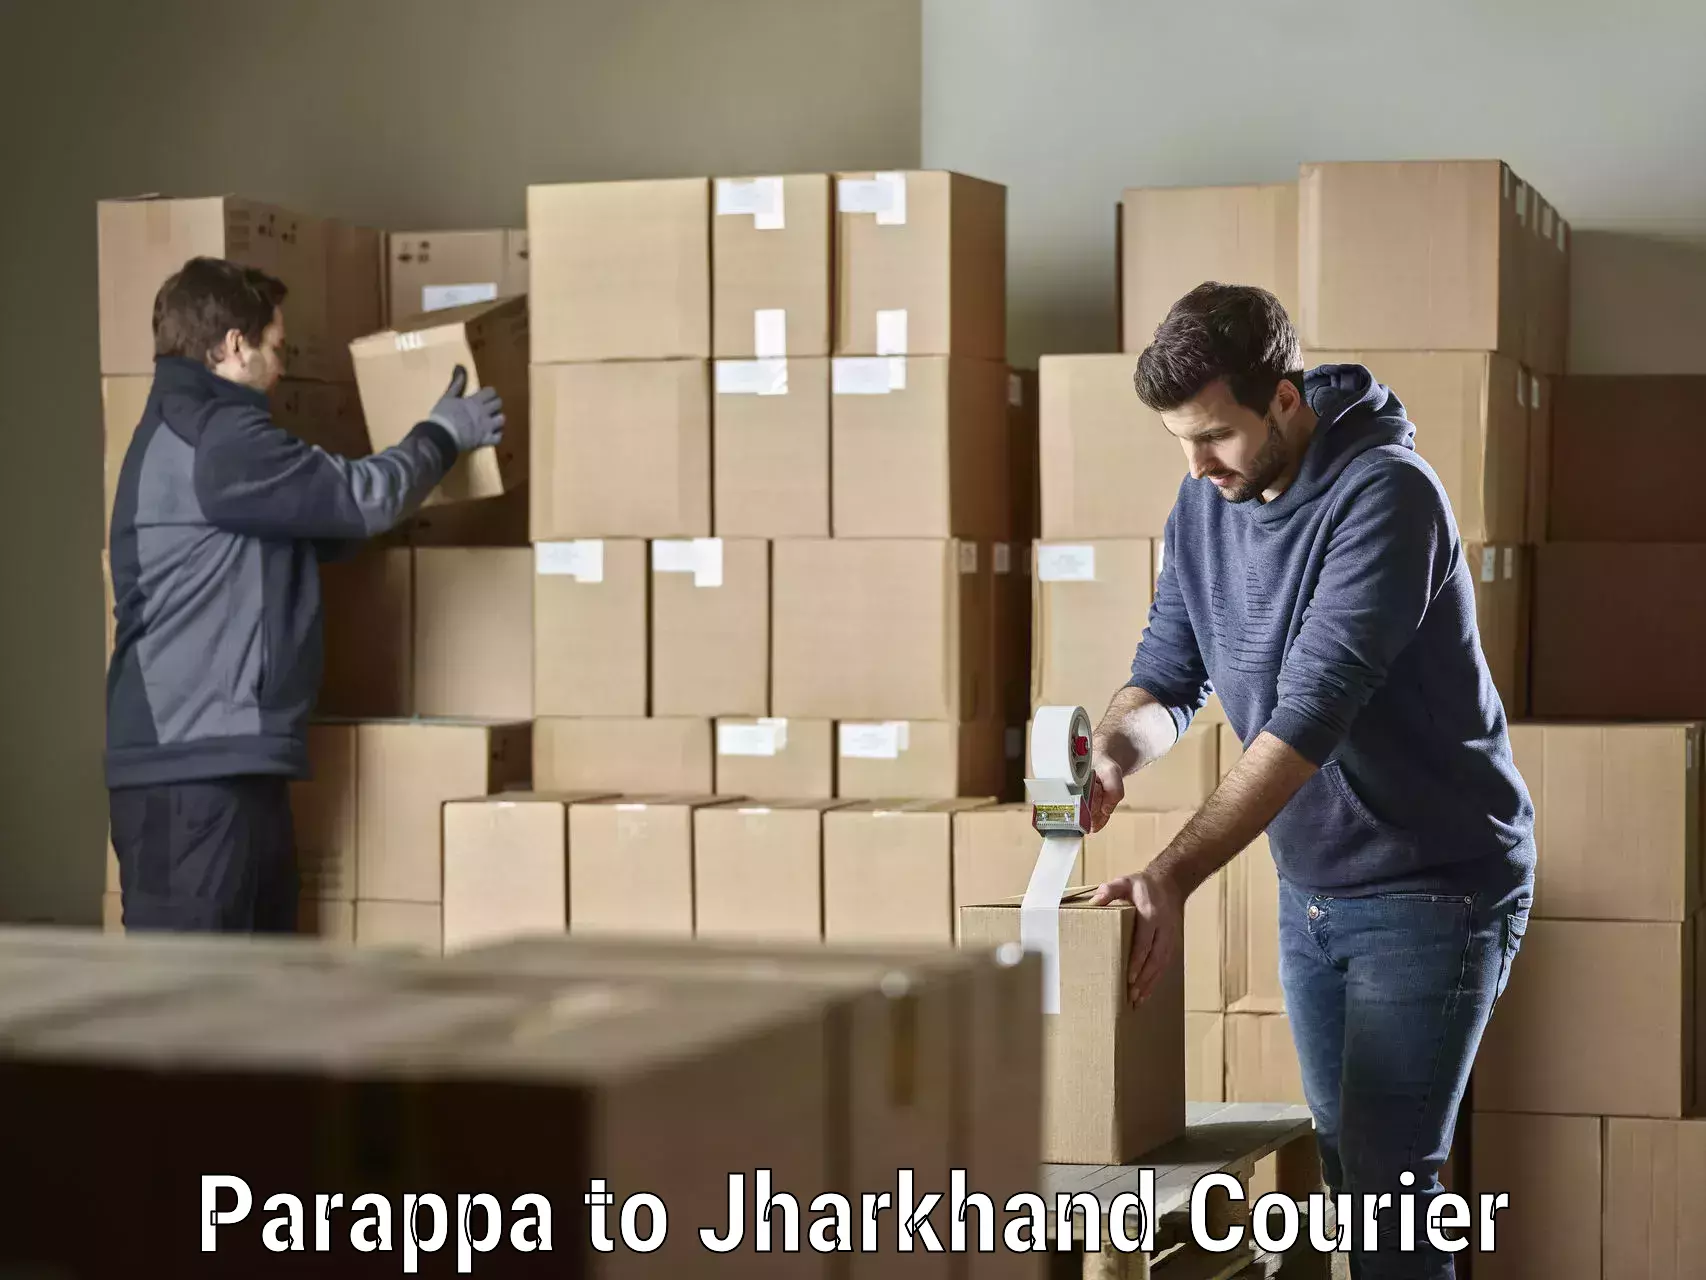 Courier service innovation Parappa to Dhalbhumgarh